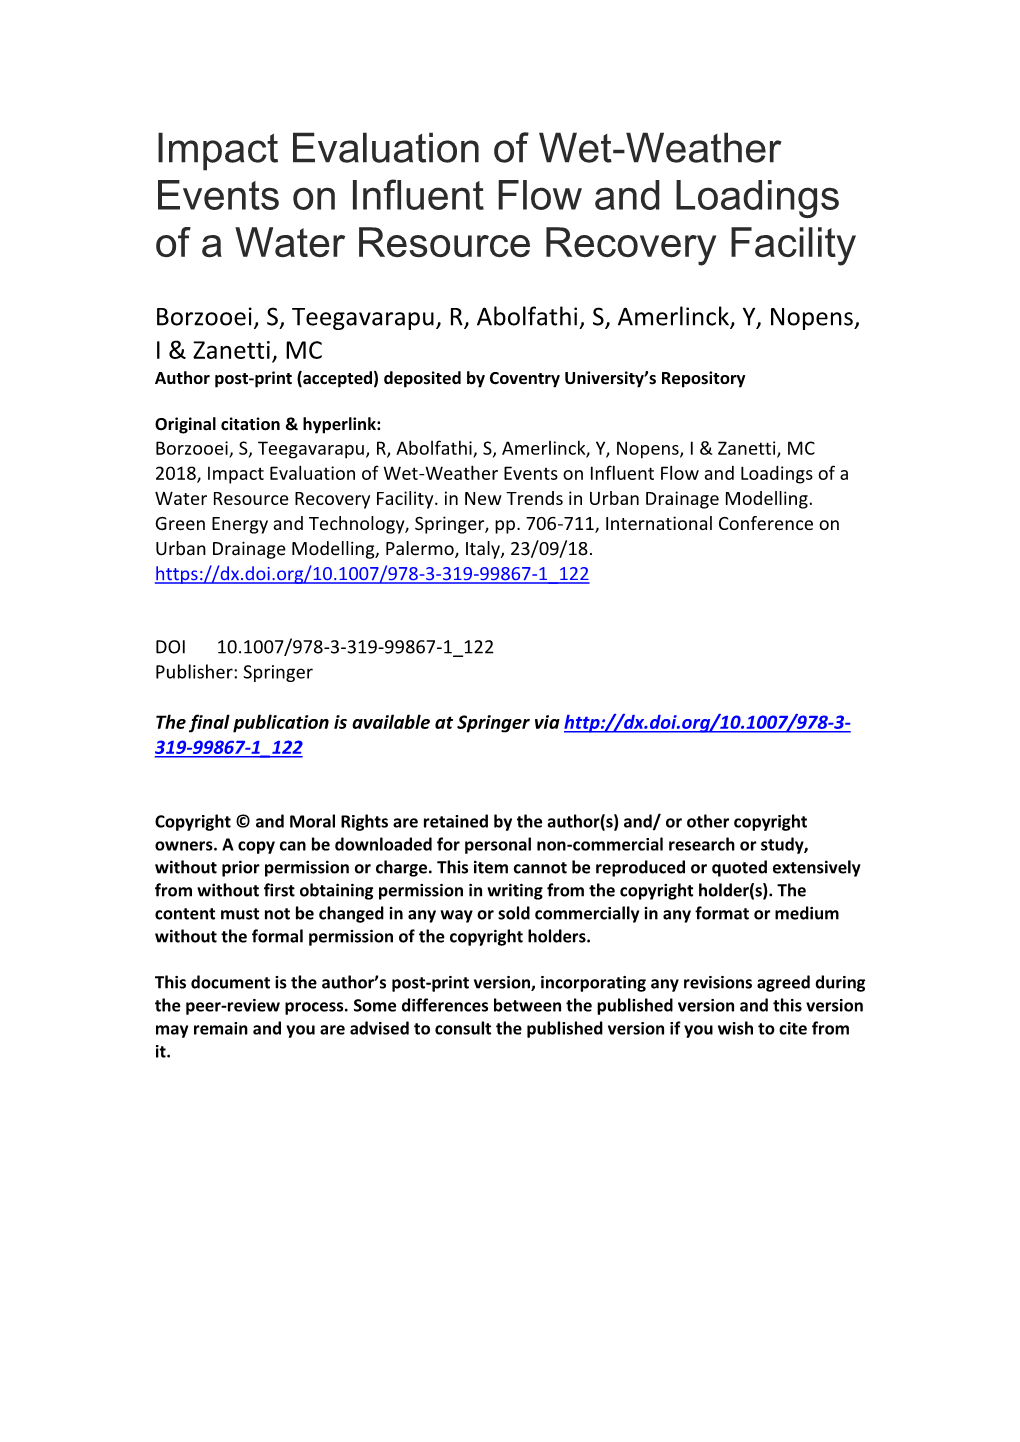 Impact Evaluation of Wet-Weather Events on Influent Flow and Loadings of a Water Resource Recovery Facility